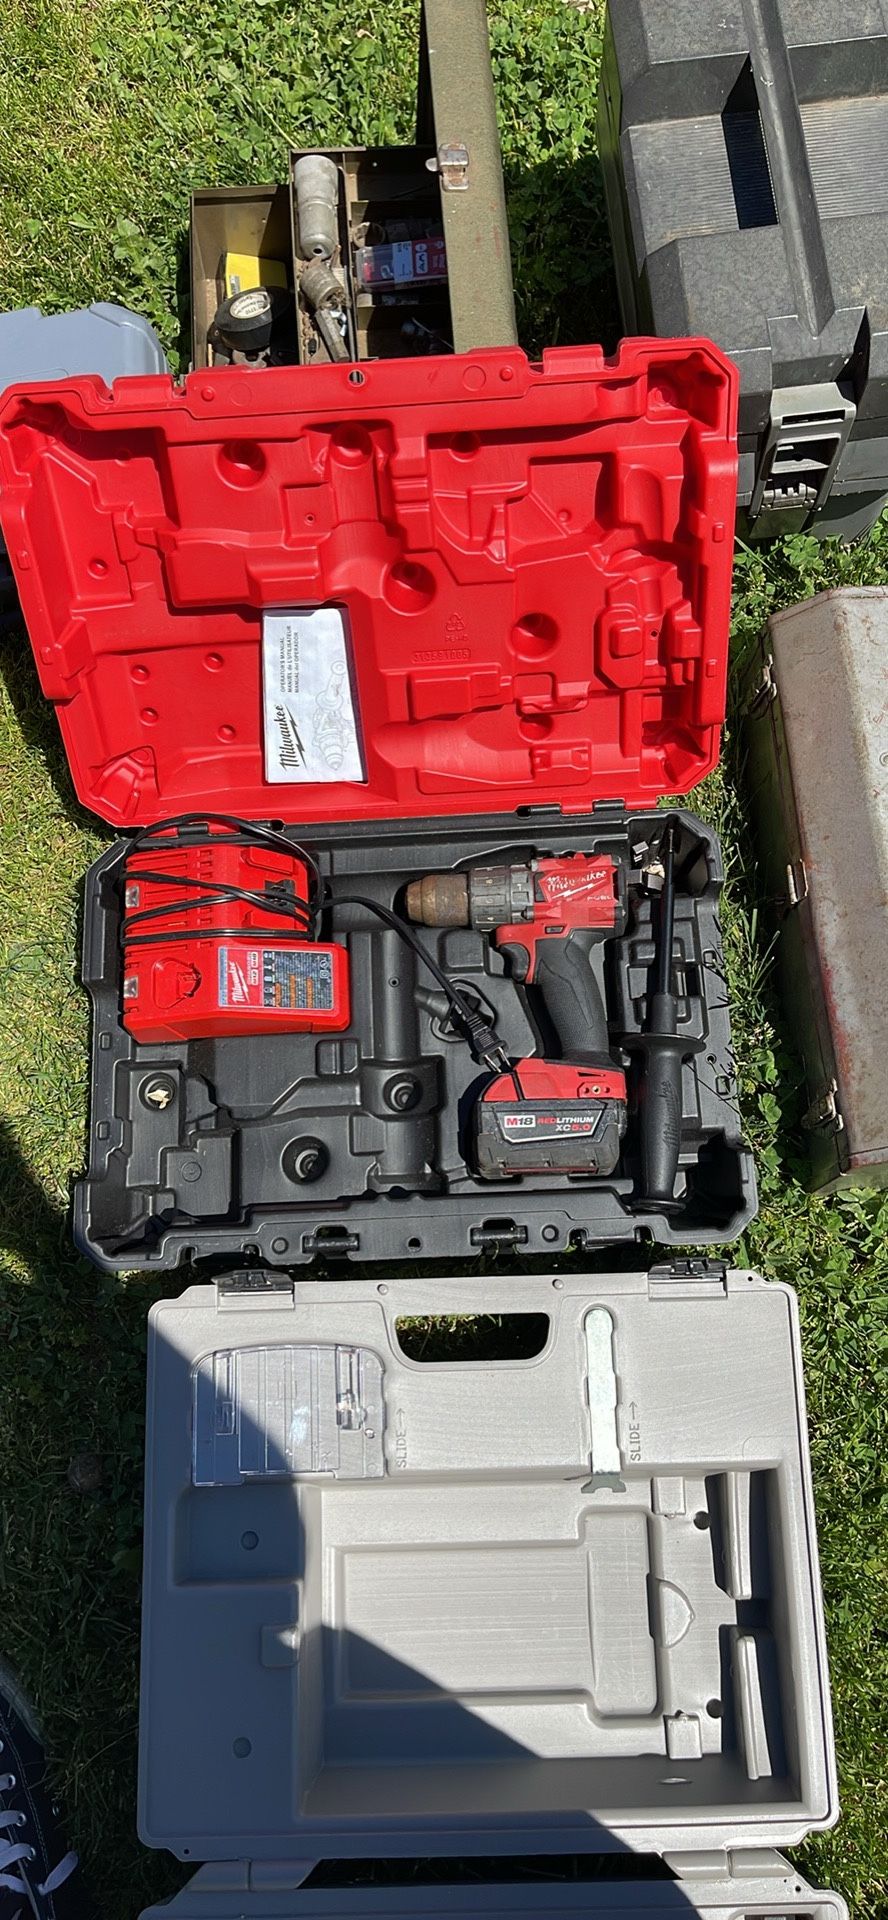 Milwaukee Drill Battery Charger and Case